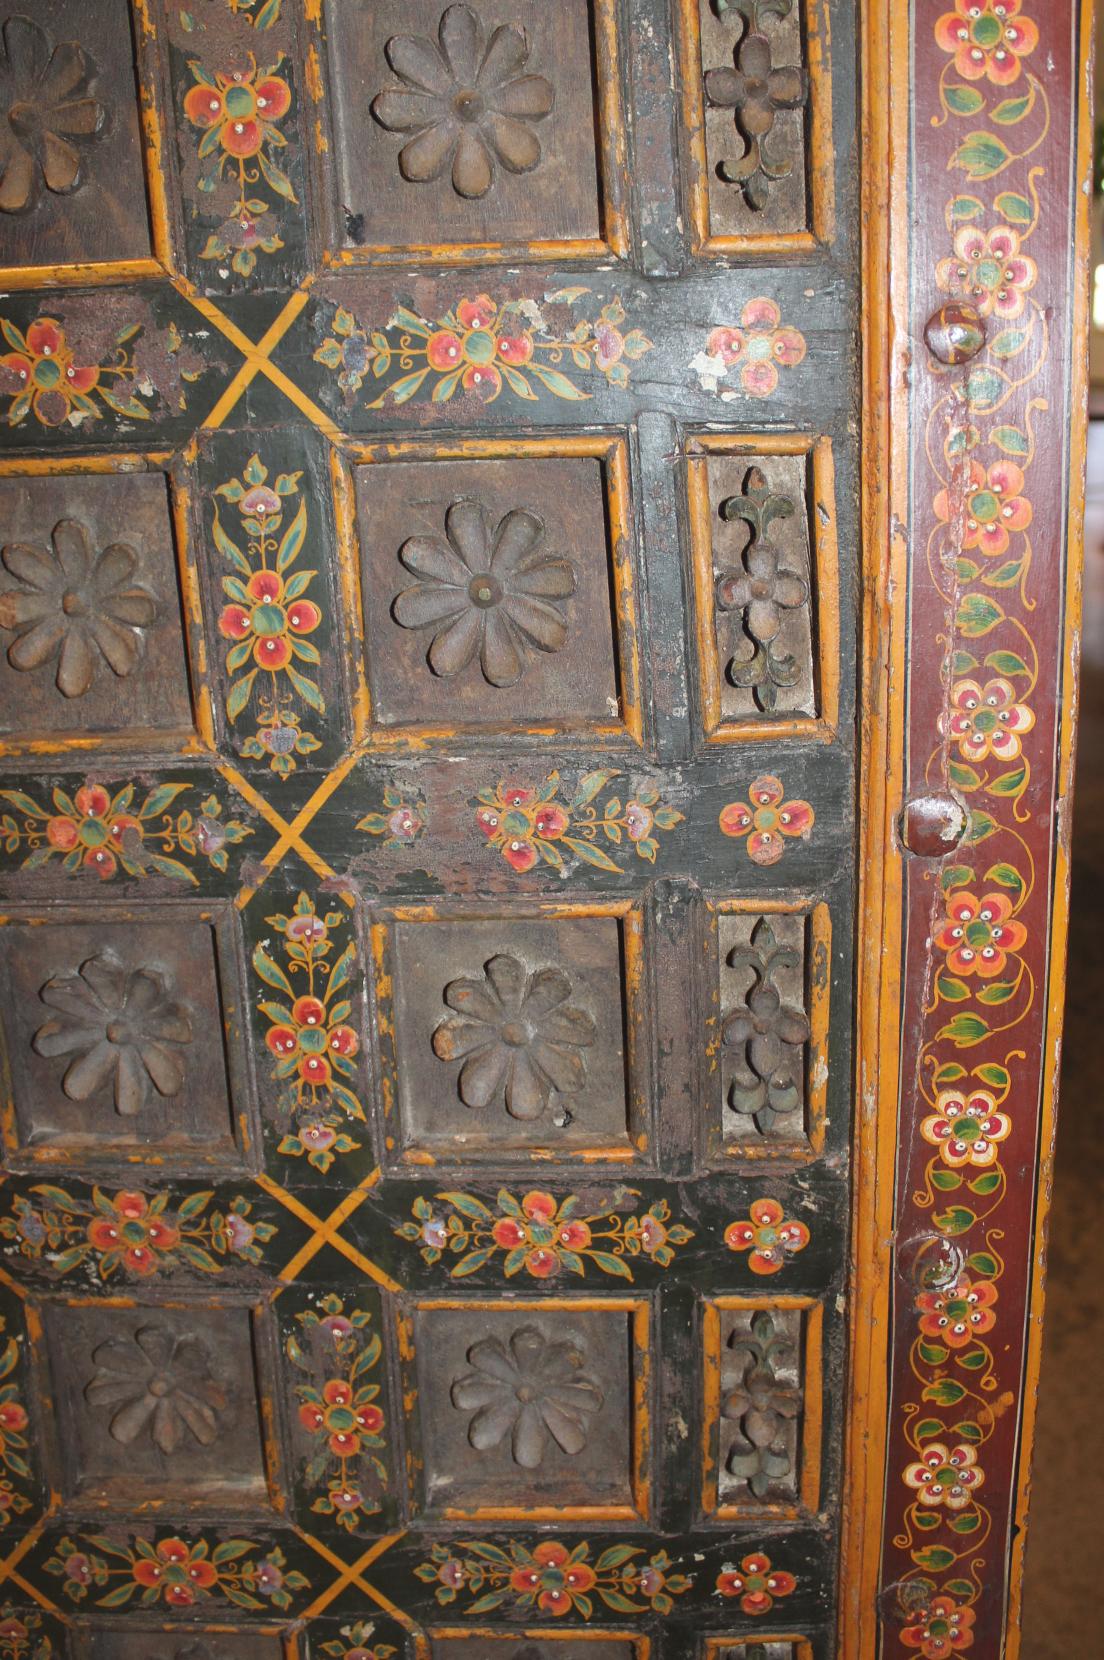 19th Century Indian Polychrome Carved Architectural Ceiling Panel with Lotus Blossoms